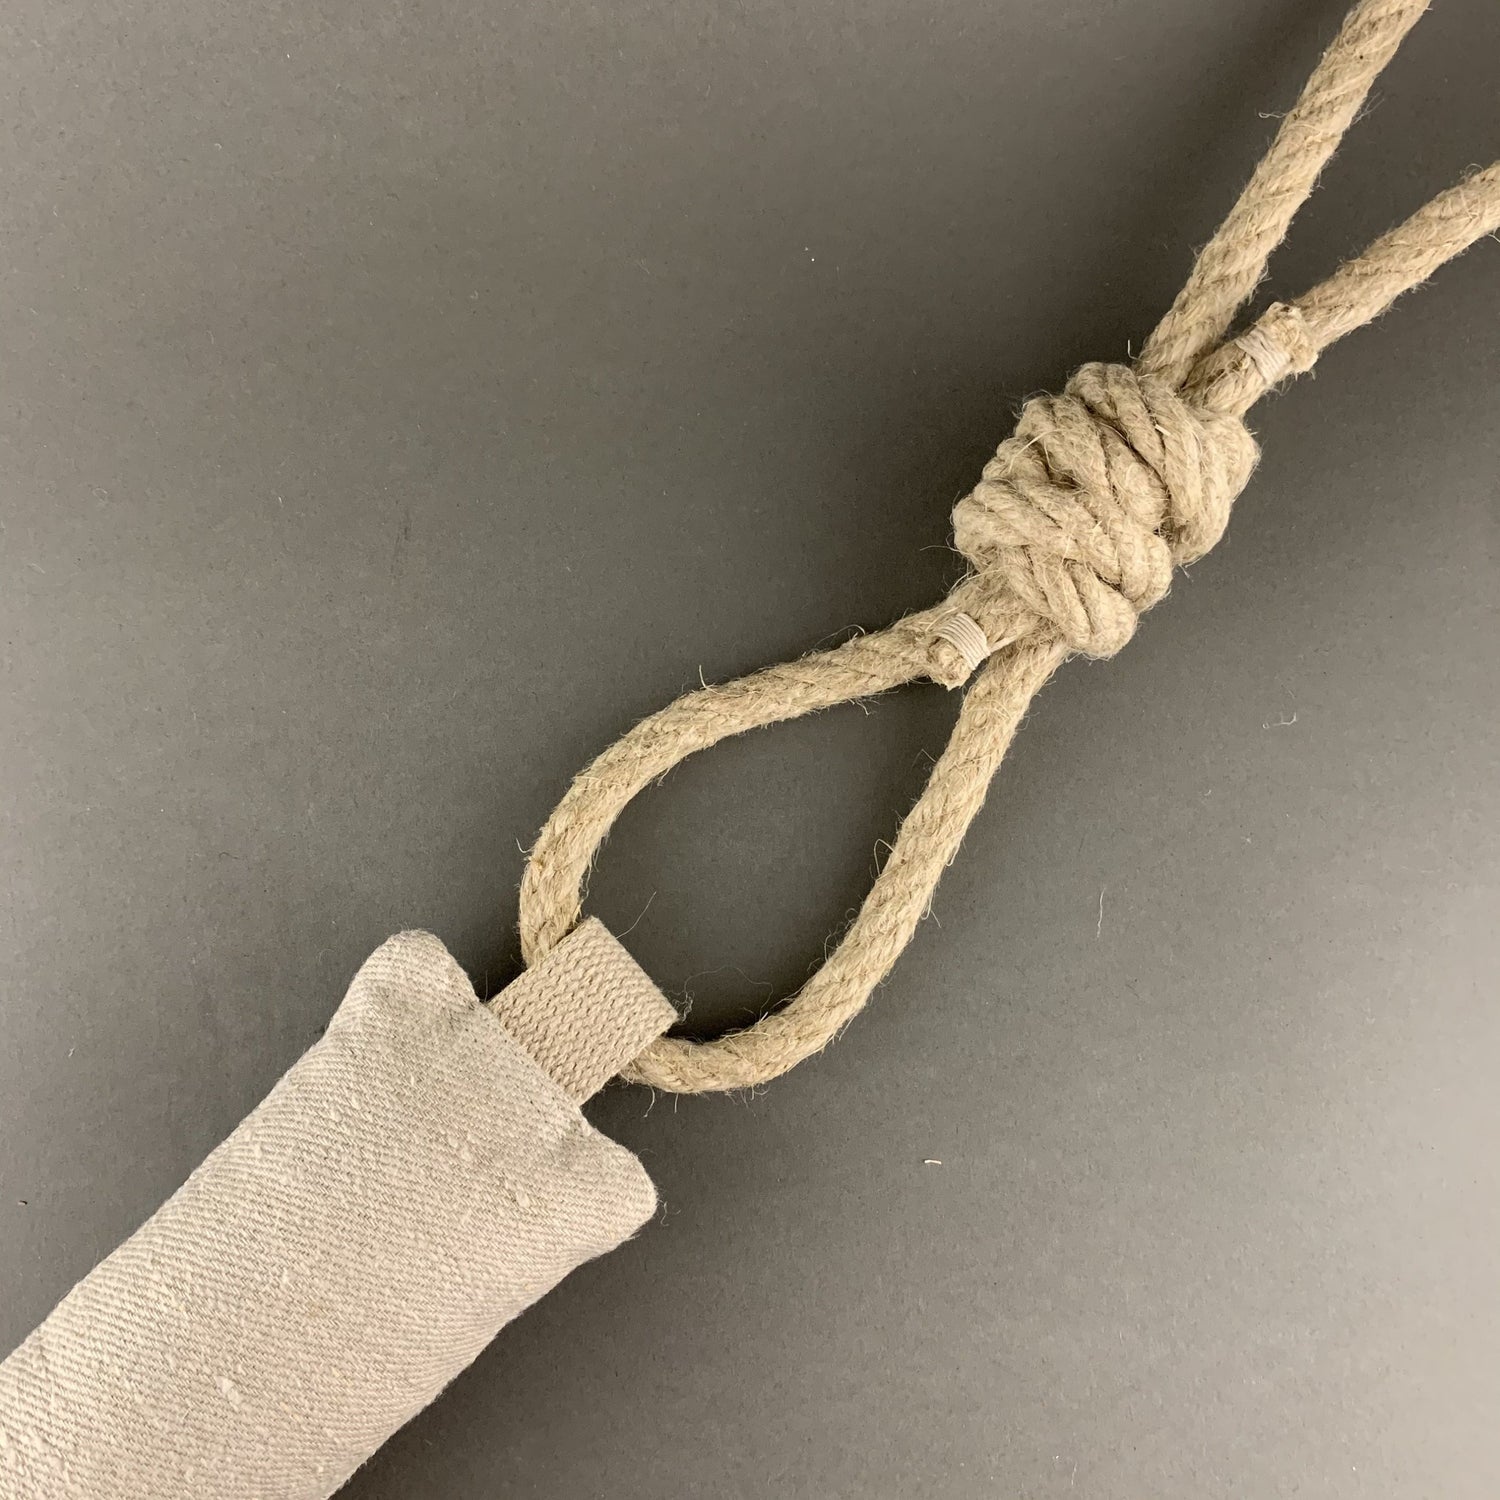 hemp is an excellent alternative for dog toys